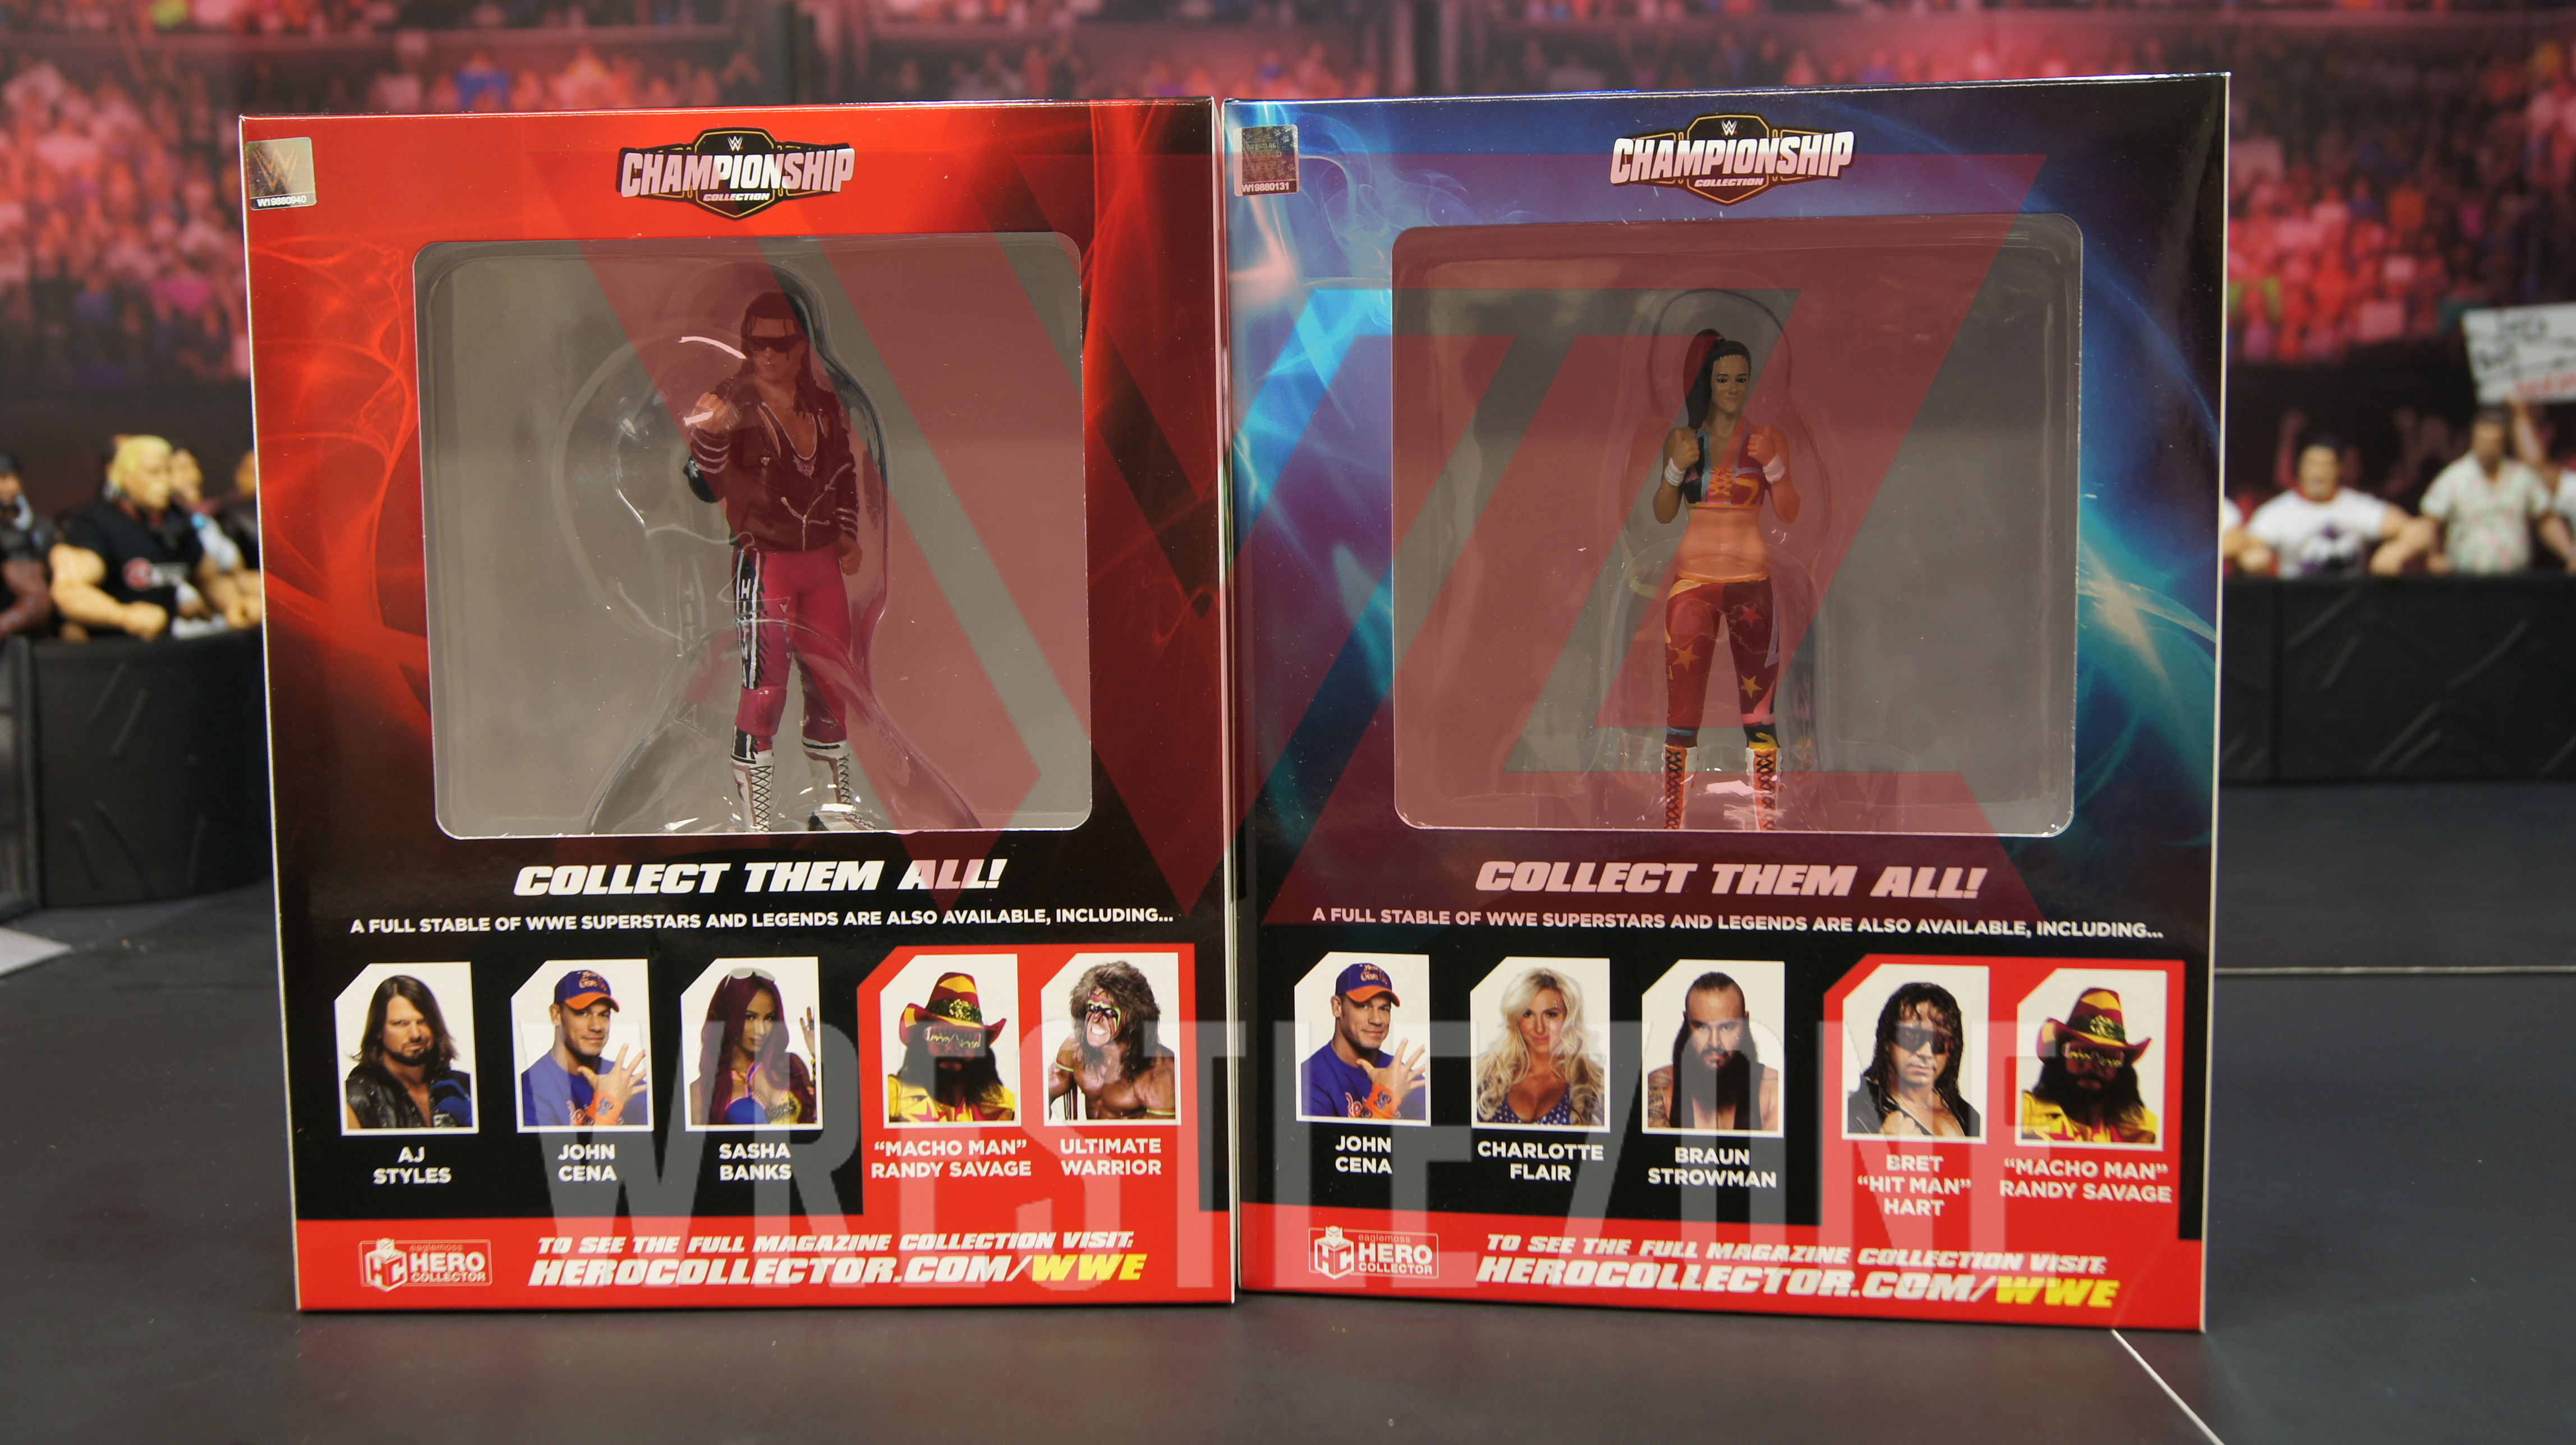 Wwe_hero_collector_bayley_bret_a